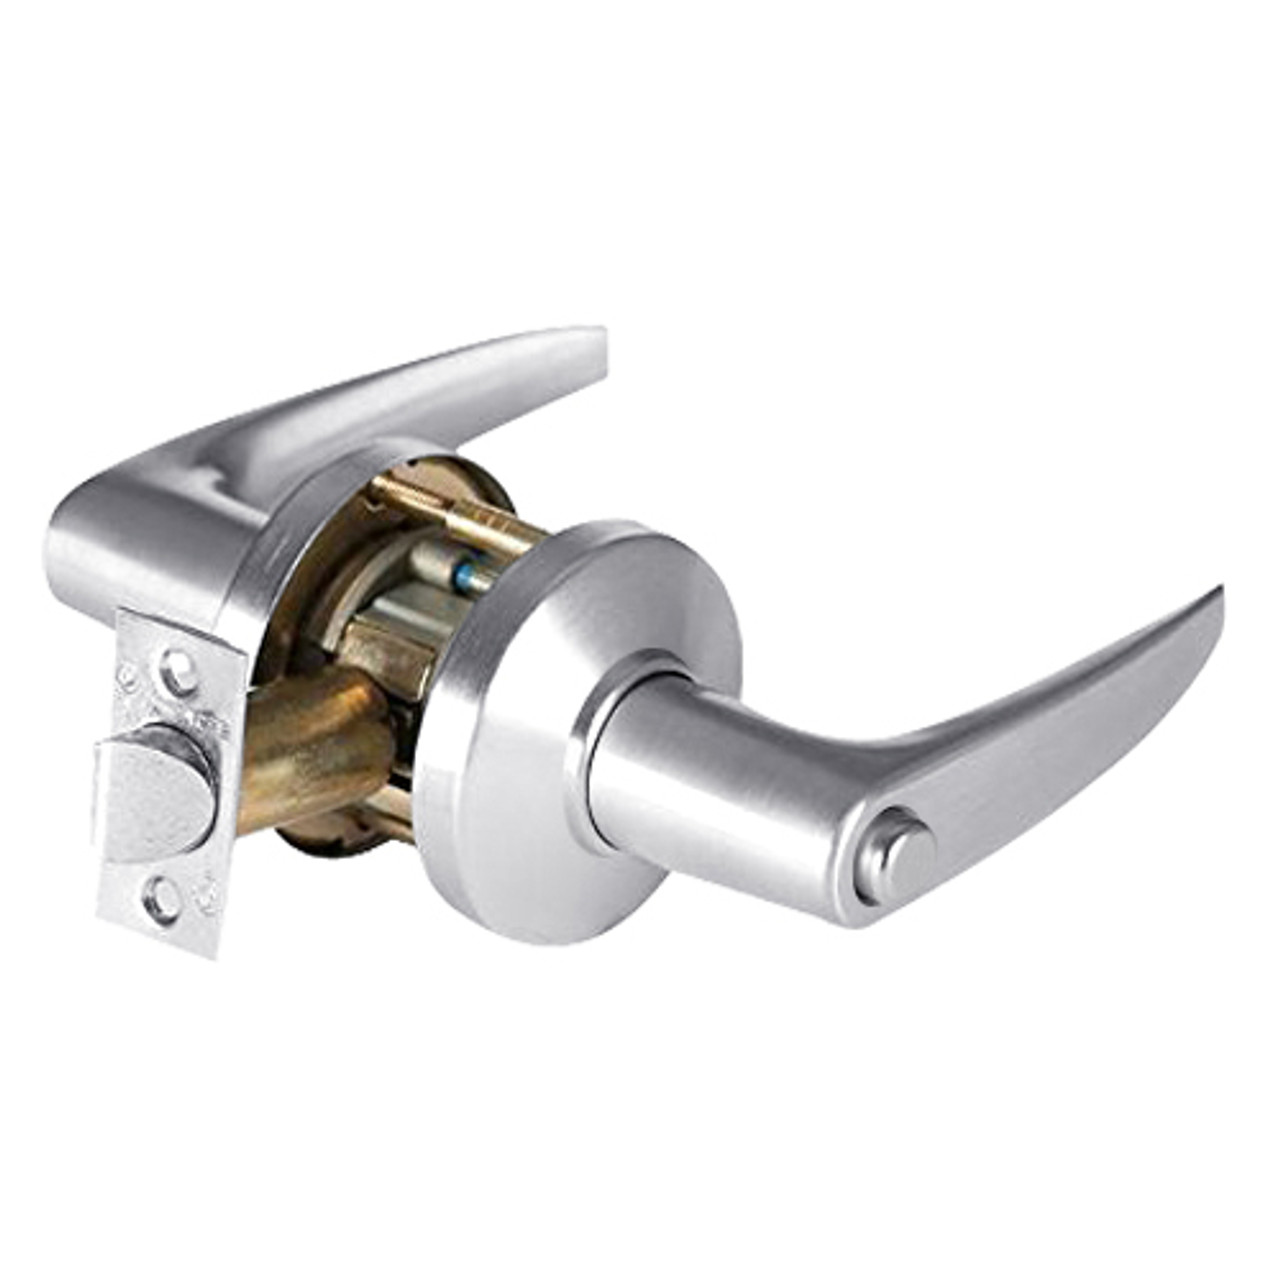 9K30L16CSTK625 Best 9K Series Privacy Heavy Duty Cylindrical Lever Locks with Curved Without Return Lever Design in Bright Chrome